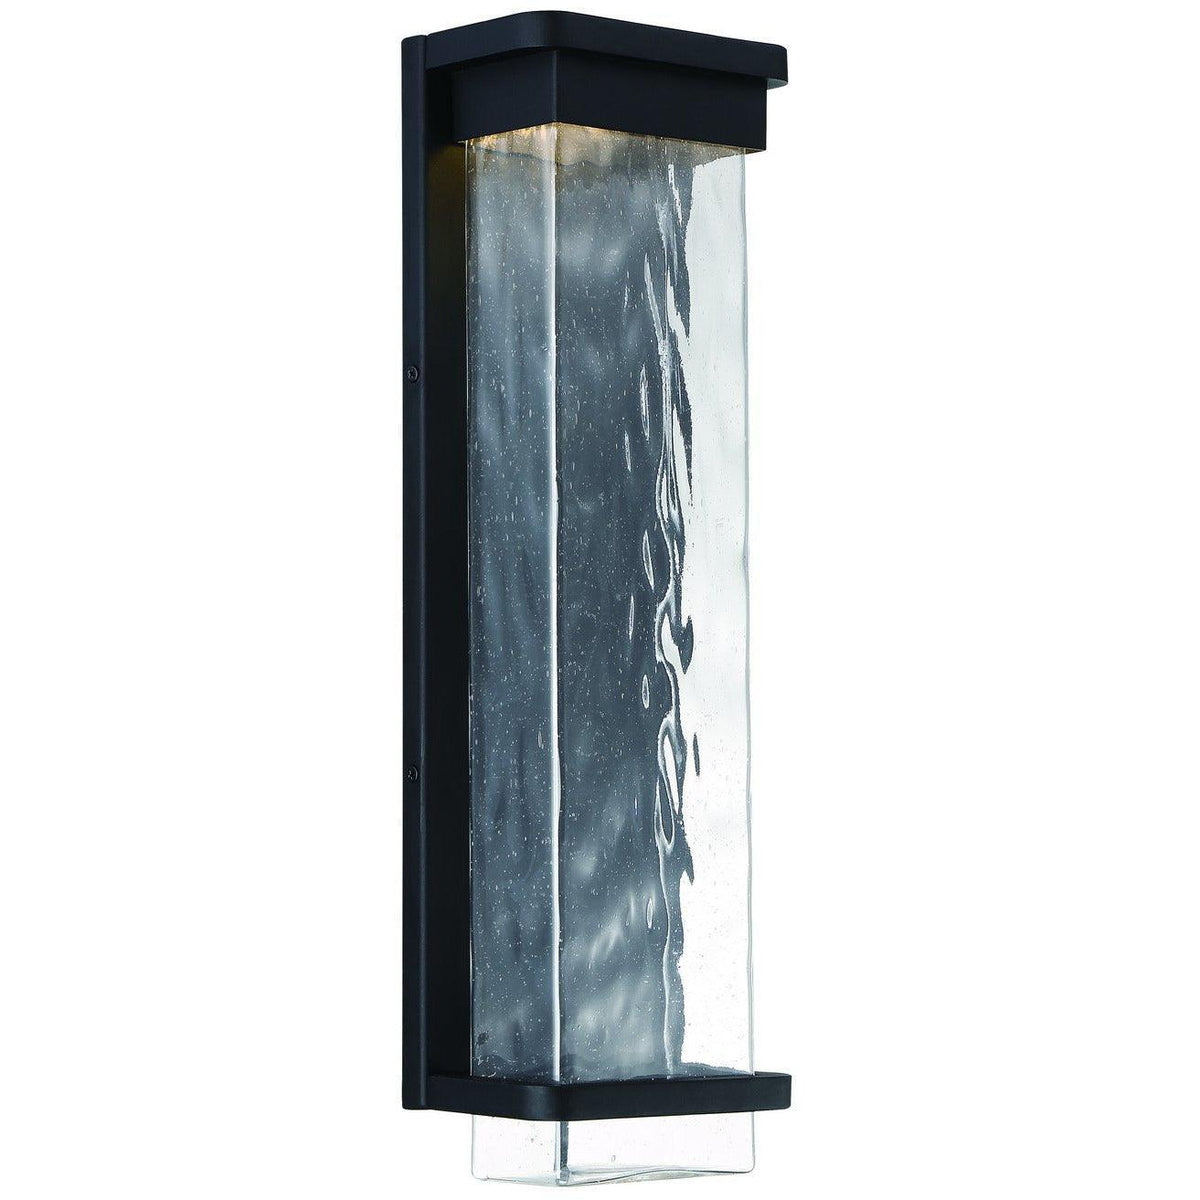 Modern Forms - Vitrine LED Outdoor Wall Mount - WS-W32521-BK | Montreal Lighting & Hardware